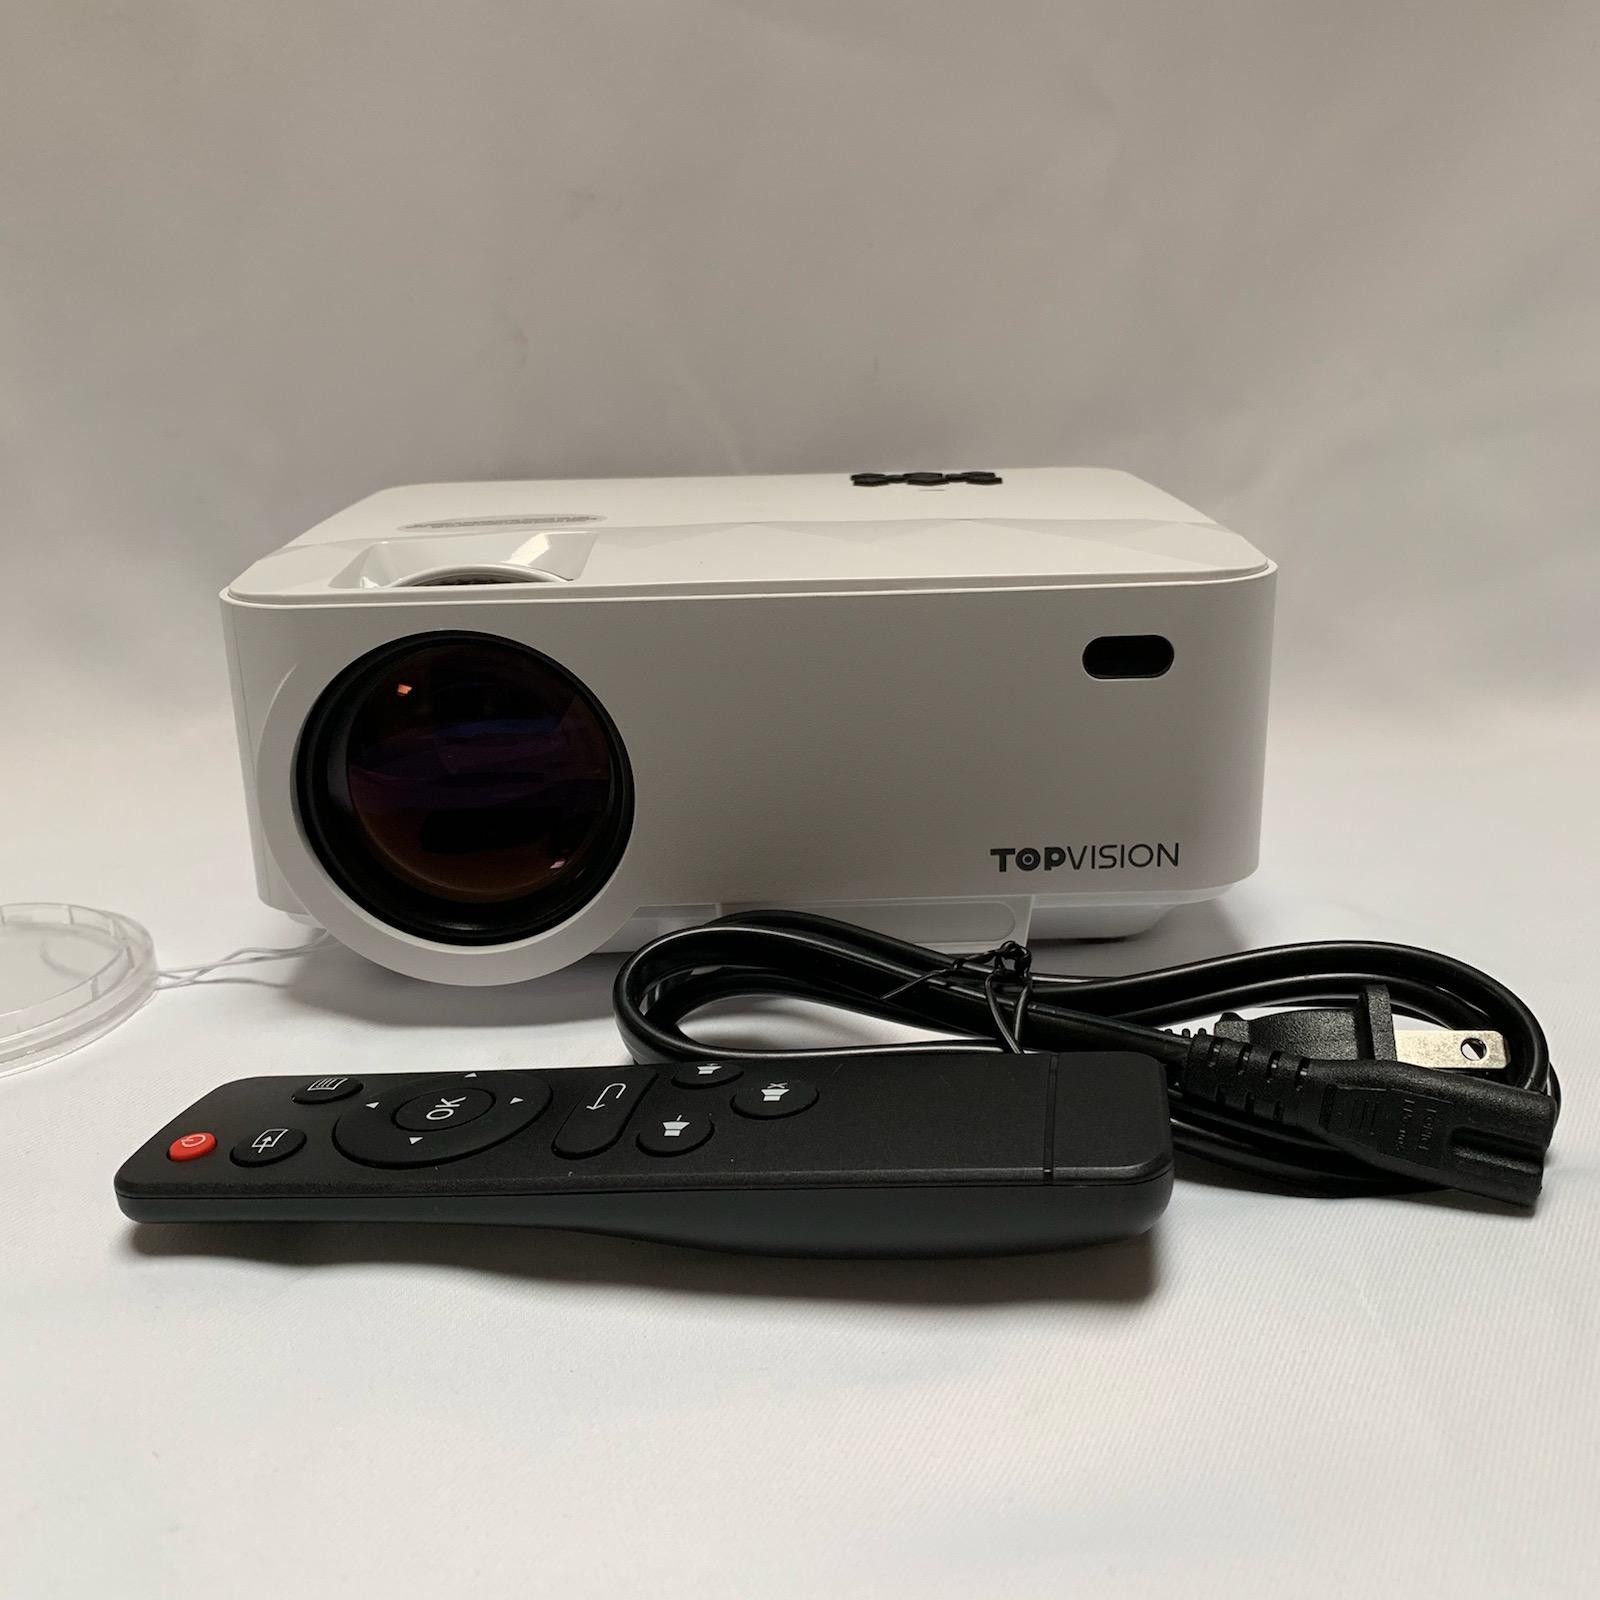 Topvision 2400Lux Projector with Synchronize Smart Phone Screen